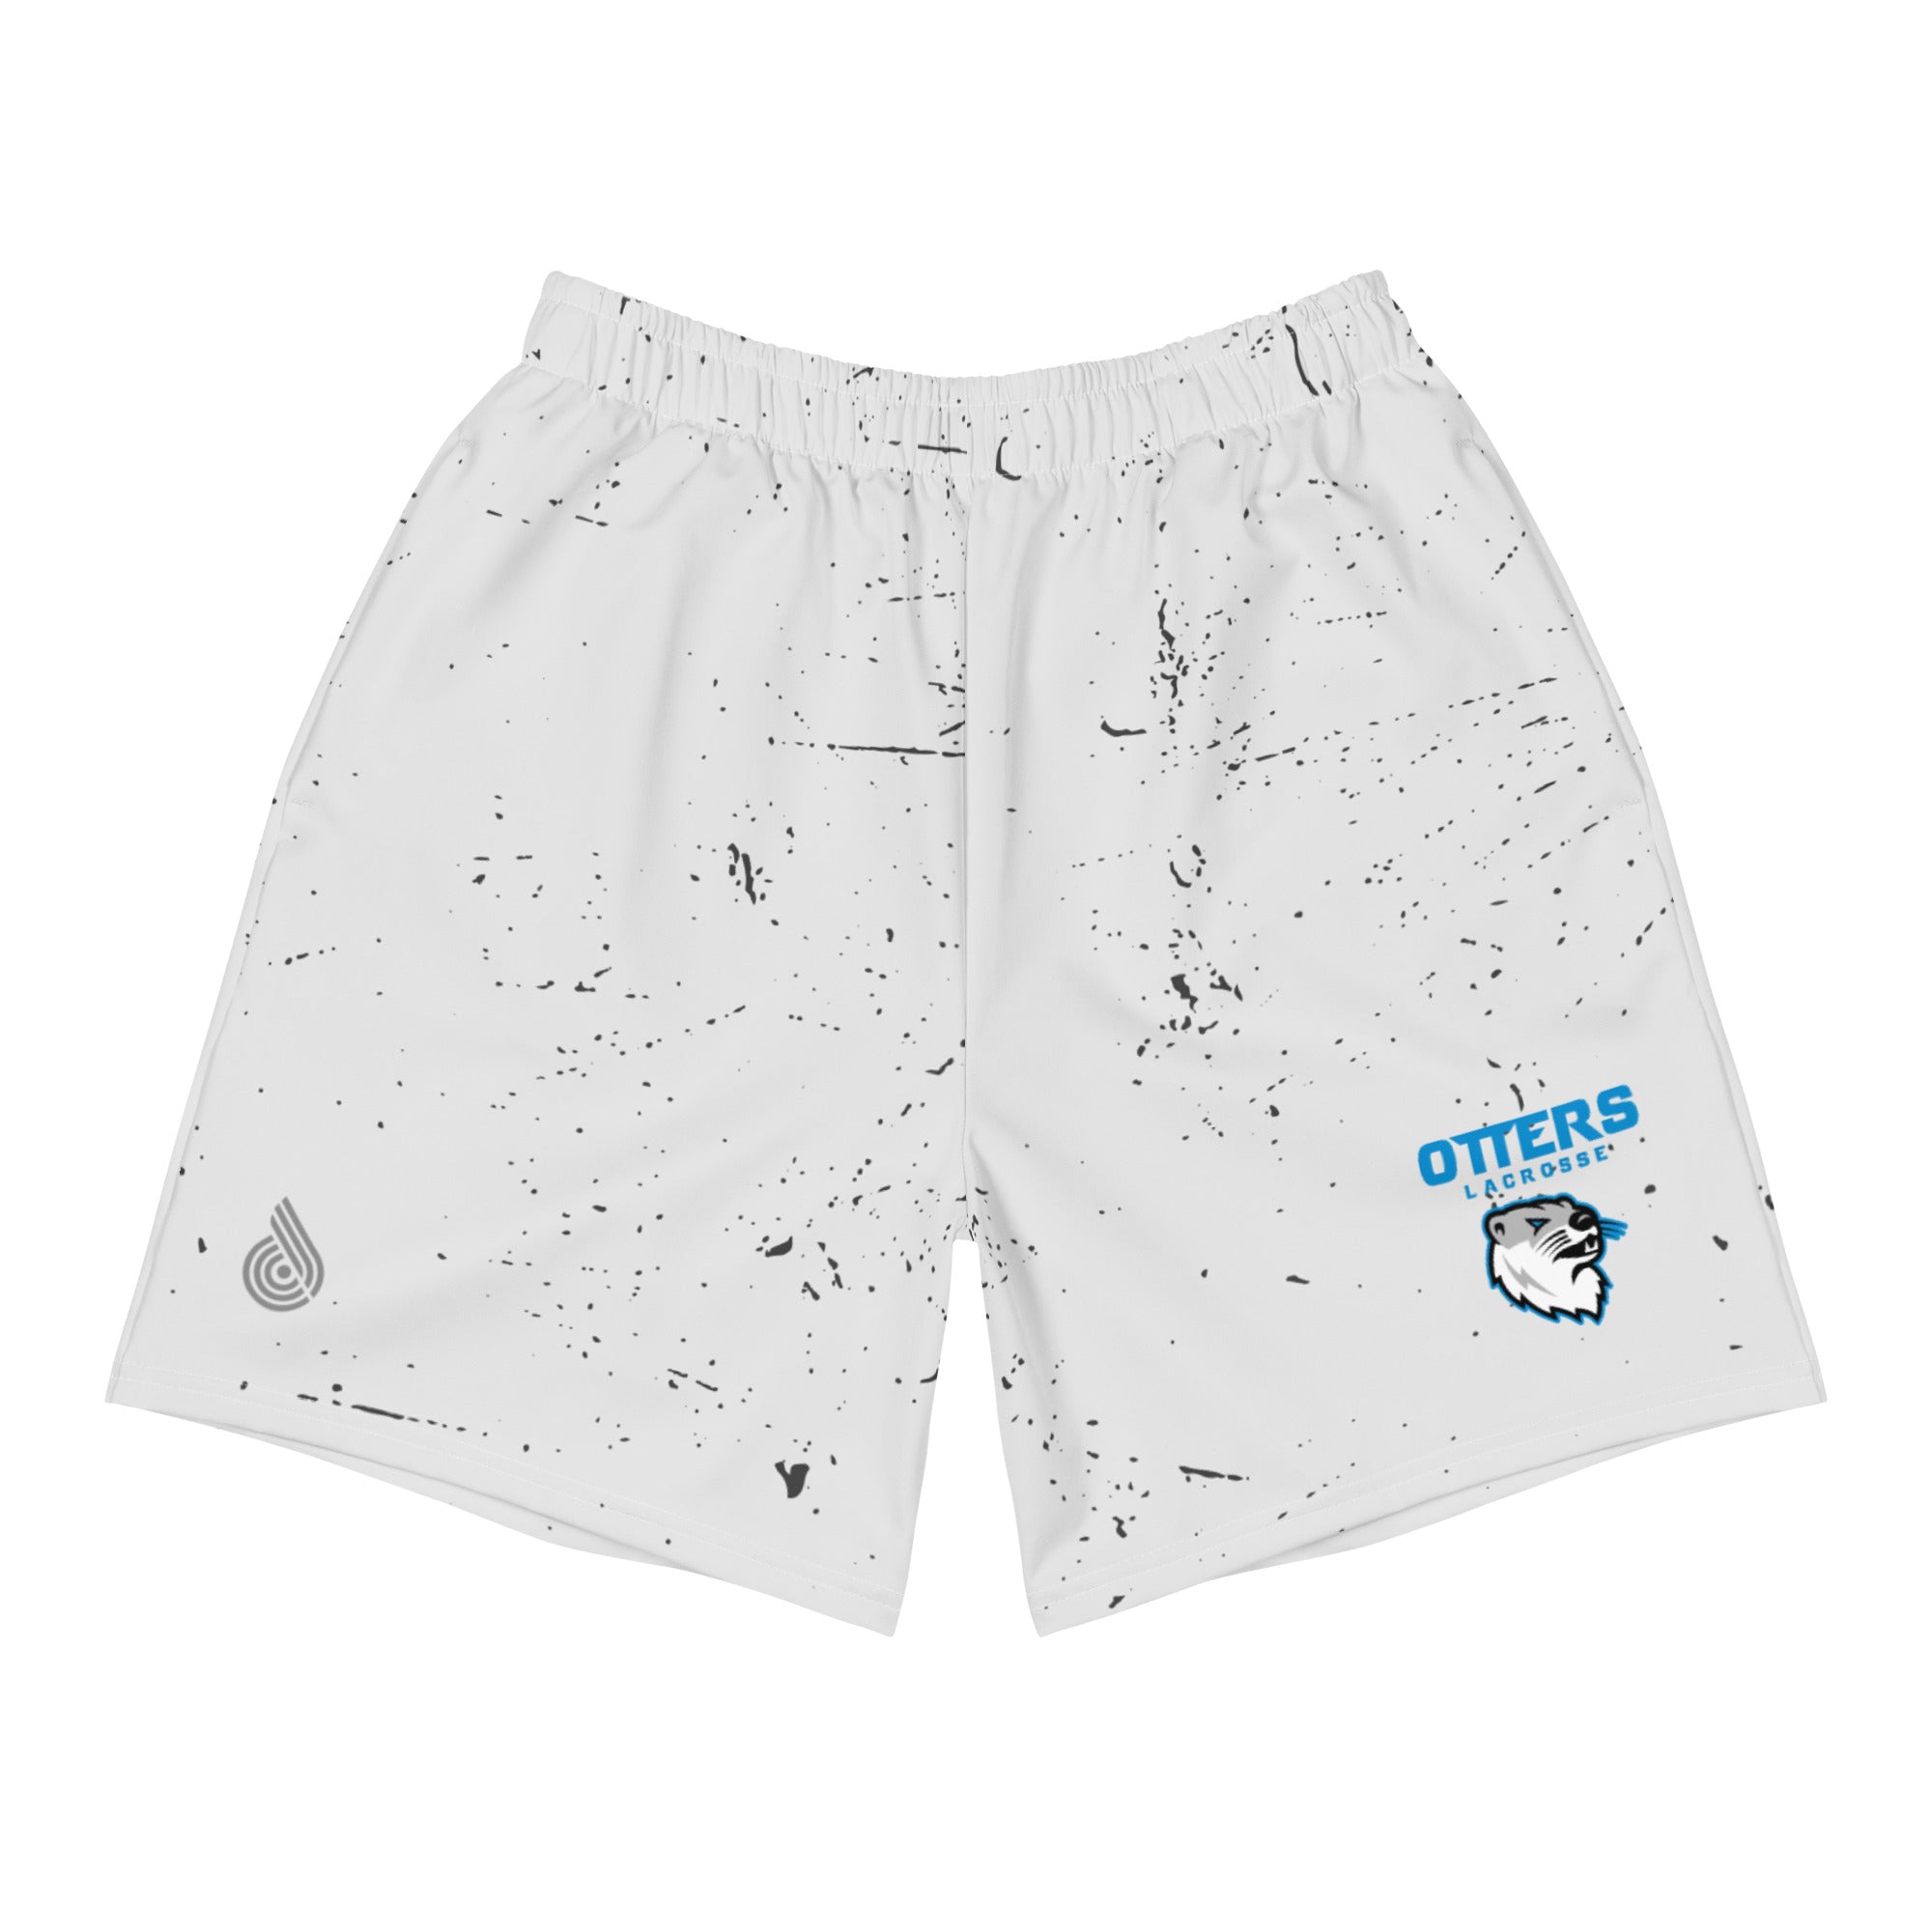 Otters Men's Recycled Athletic Shorts